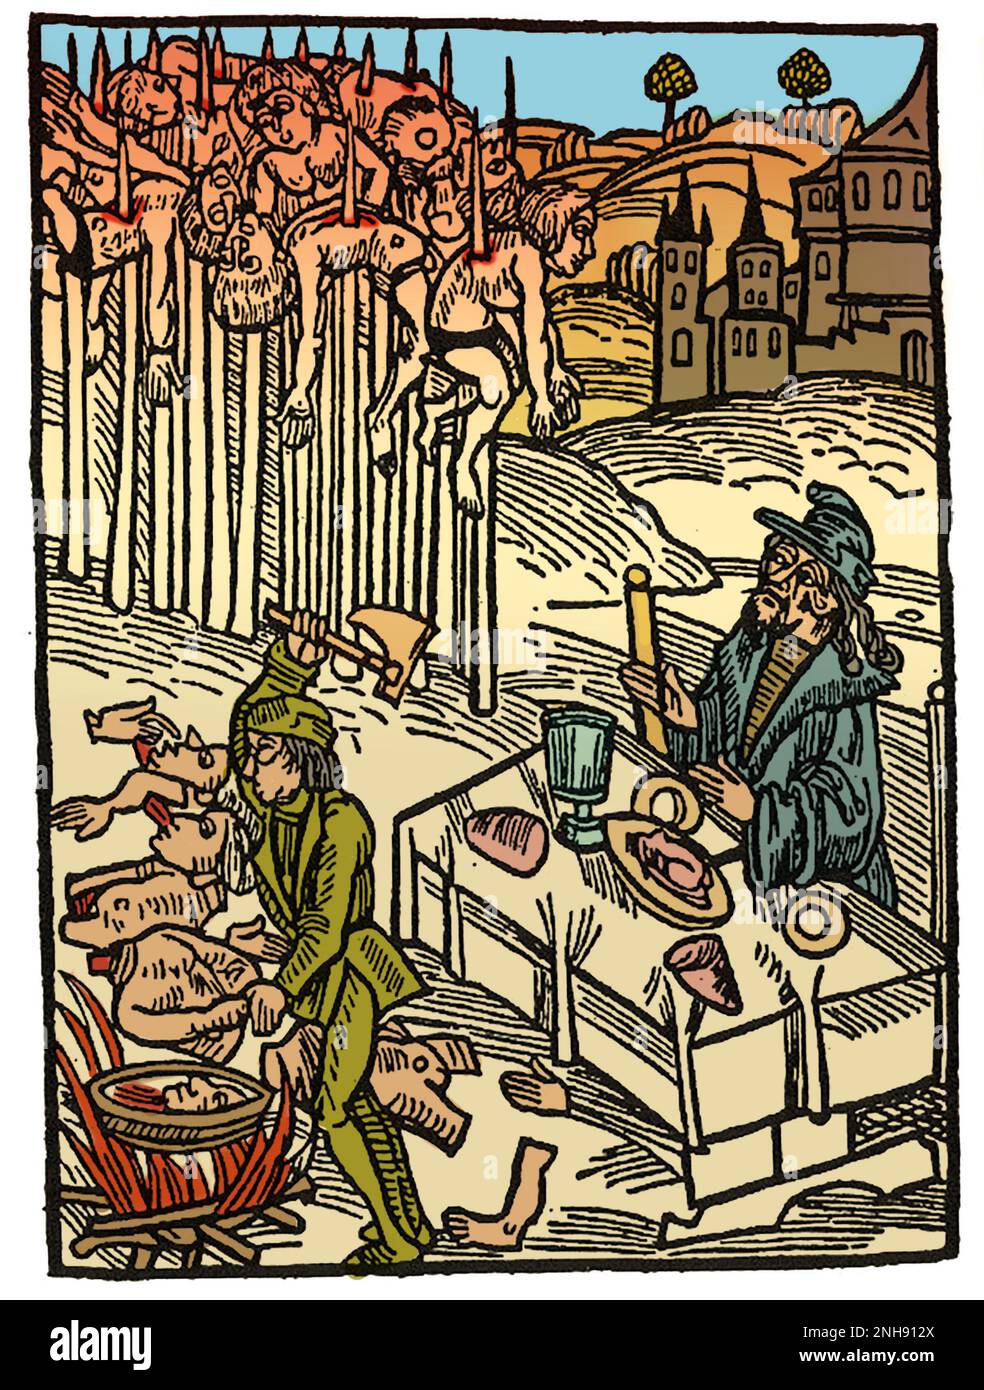 Vlad III dining among the impaled corpses of his victims. Engraving from 1500. Vlad III, commonly known as Vlad the Impaler or Vlad Dracula (1428/31 ,Ai 1476/77), was Voivode of Wallachia three times. He is often considered one of the most important rulers in Wallachian history and a national hero of Romania. Notorious for his cruelty, his patronymic inspired the name of Bram Stoker's literary vampire, Count Dracula. Colorized. Stock Photo